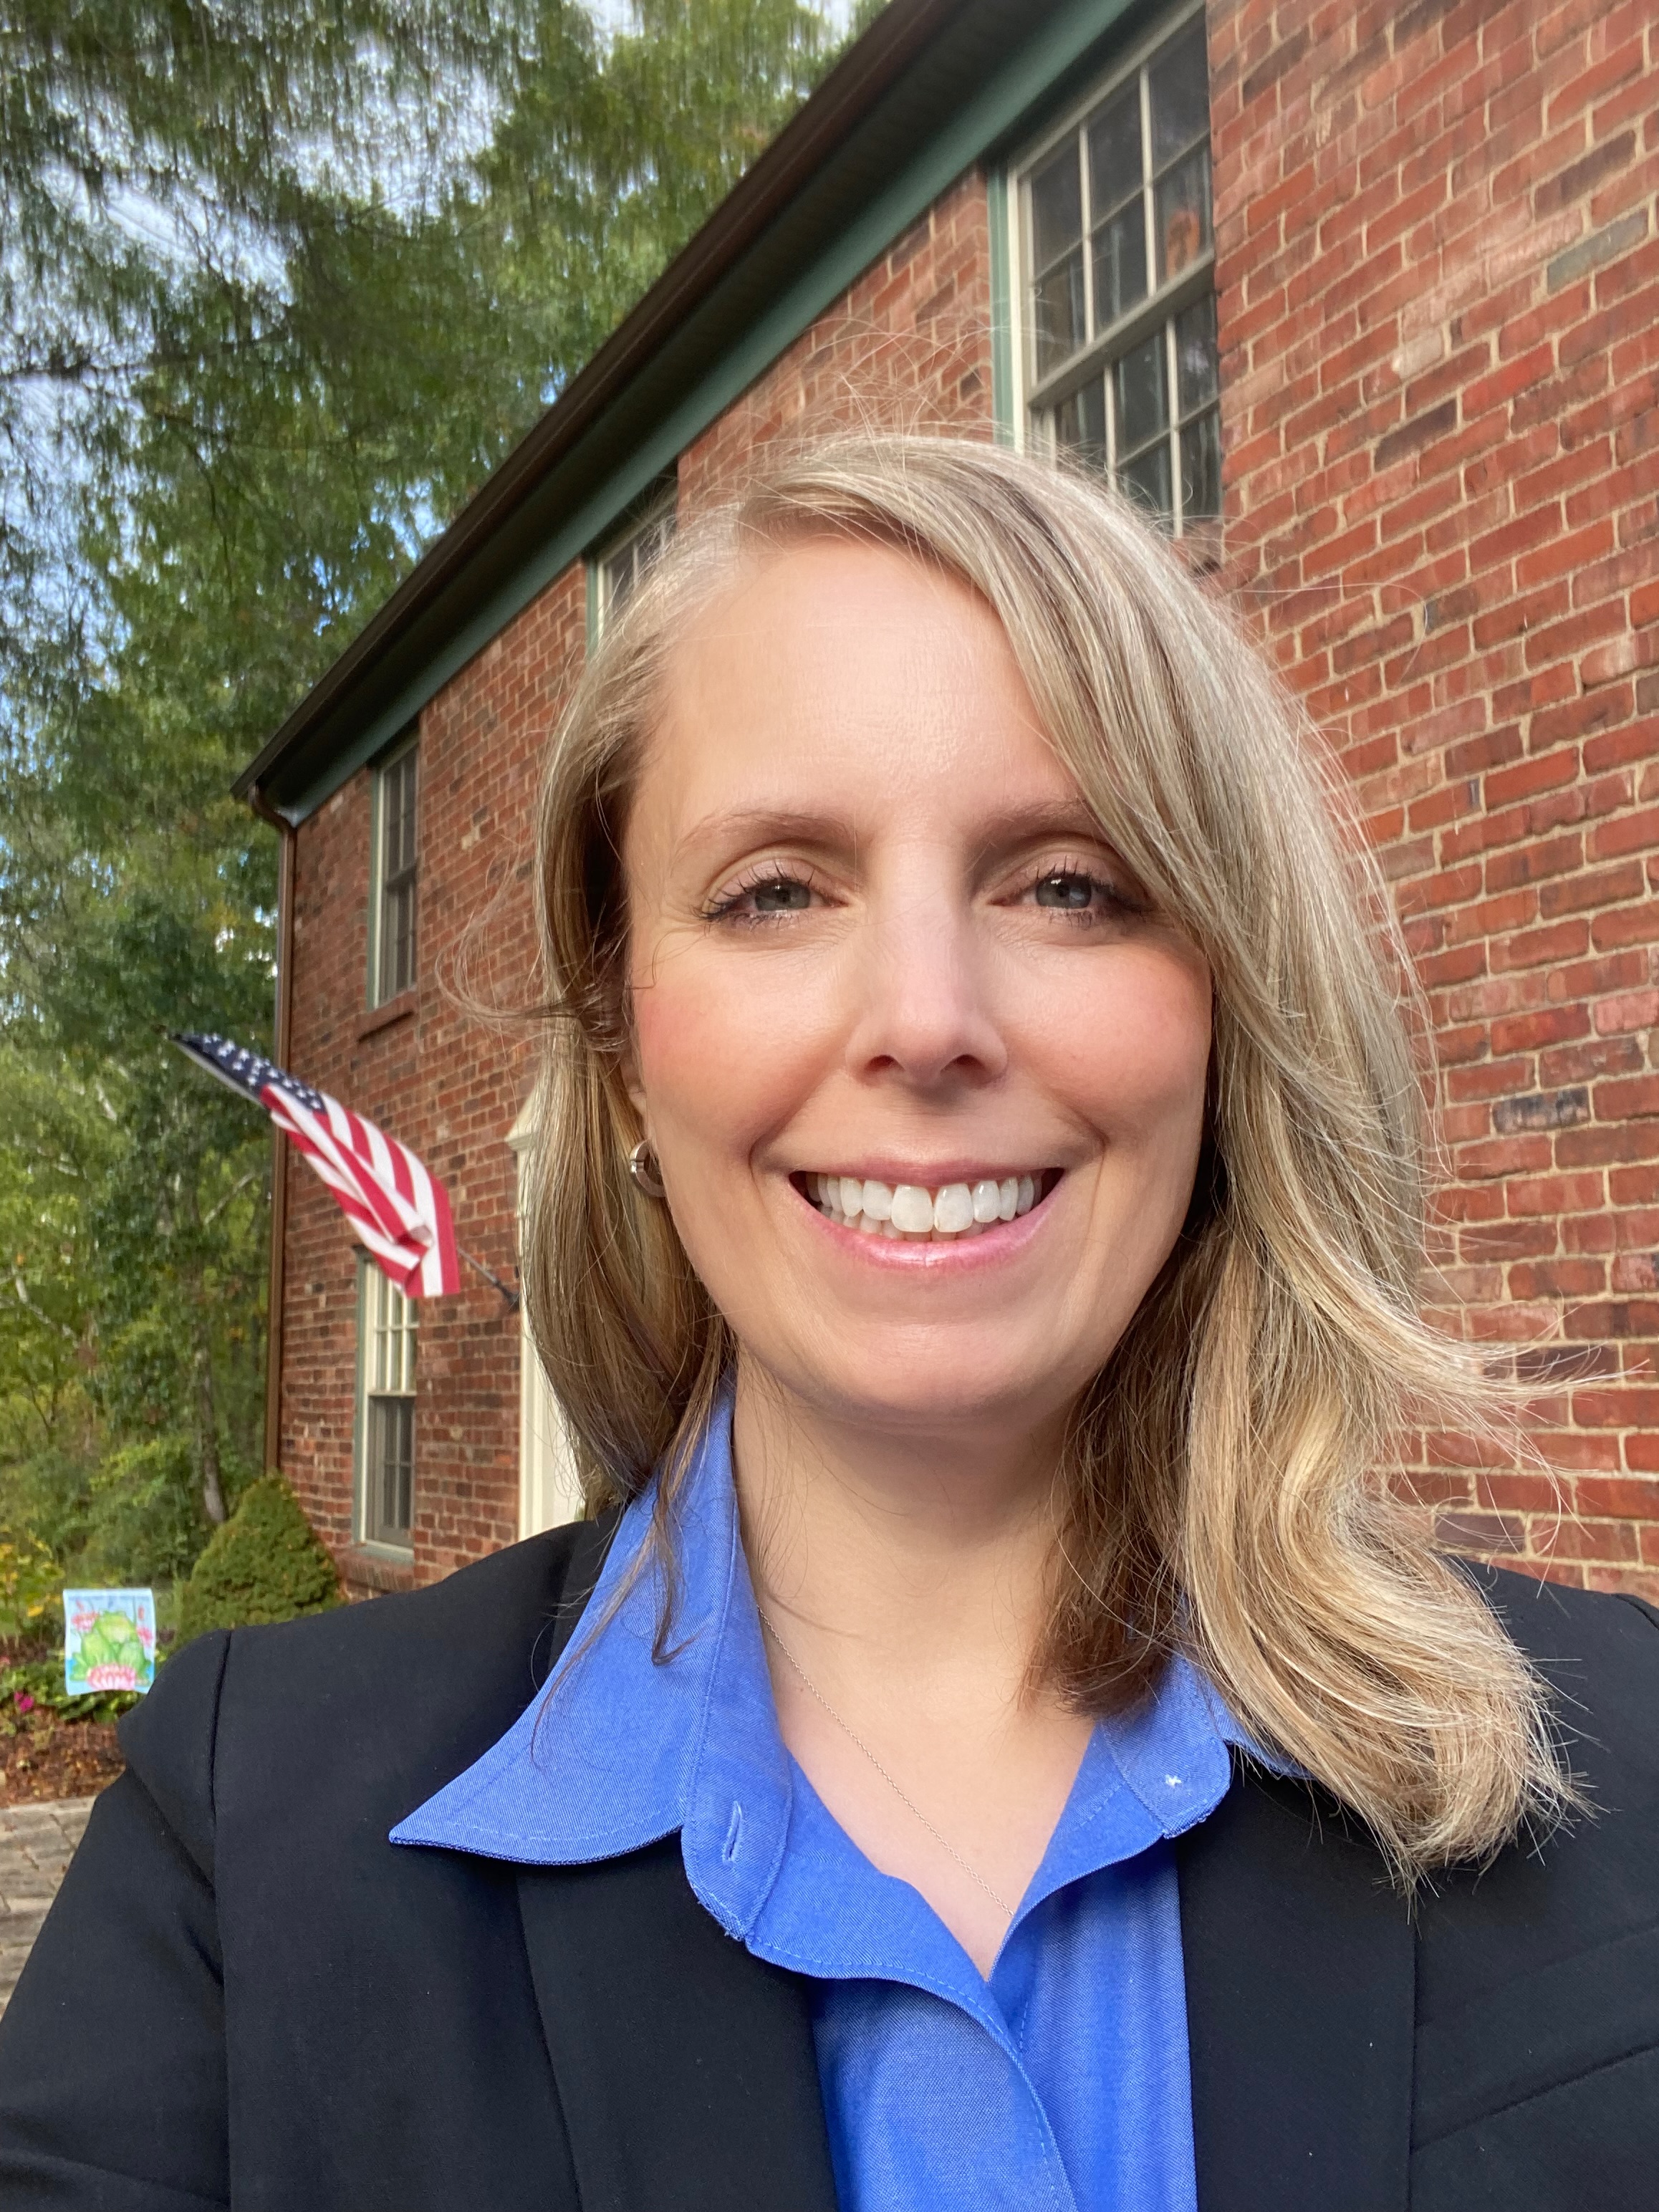 Erica N. Montbach outside a brick building with blonde hair, a blue collared shirt, and a dark jacket.